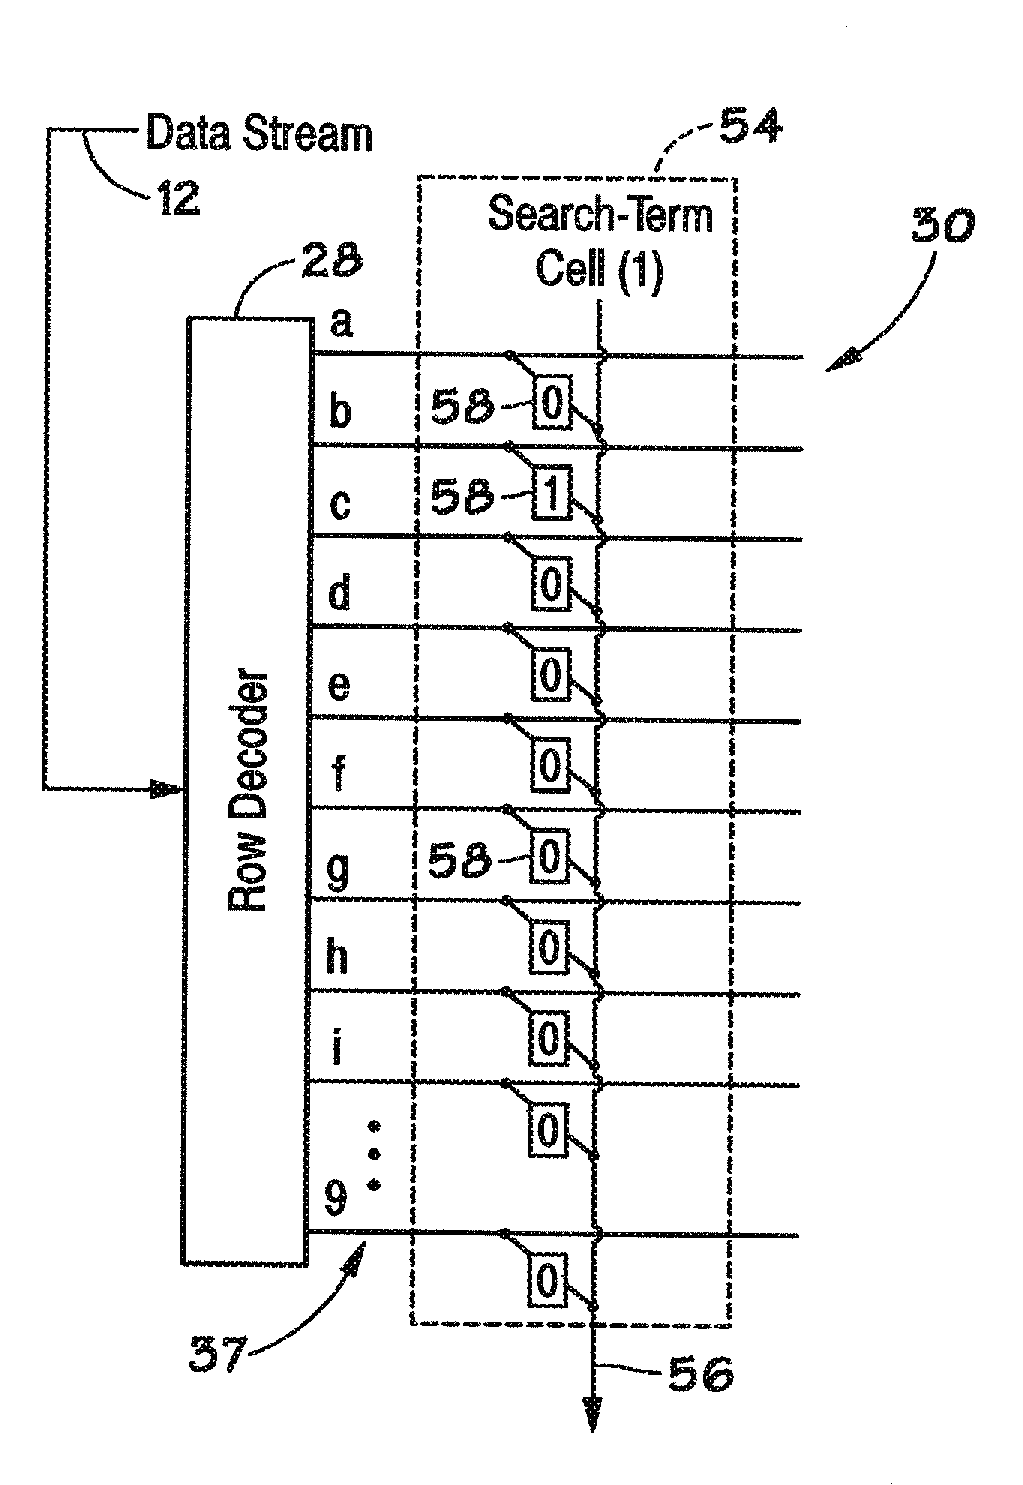 Devices, systems, and methods to synchronize parallel processing of a single data stream